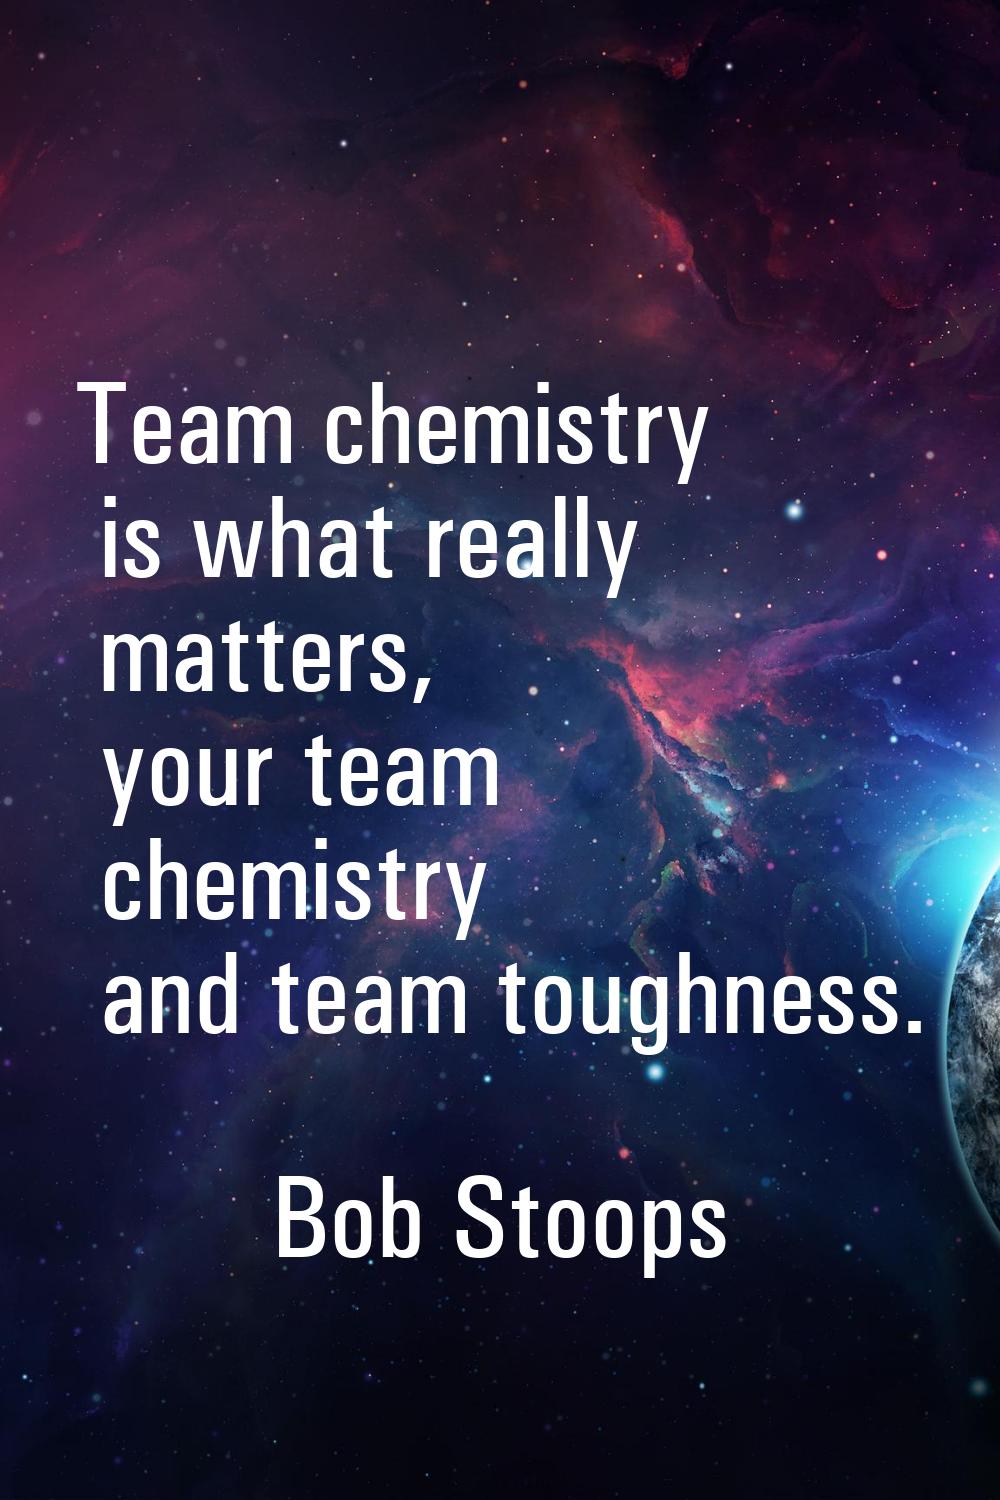 Team chemistry is what really matters, your team chemistry and team toughness.